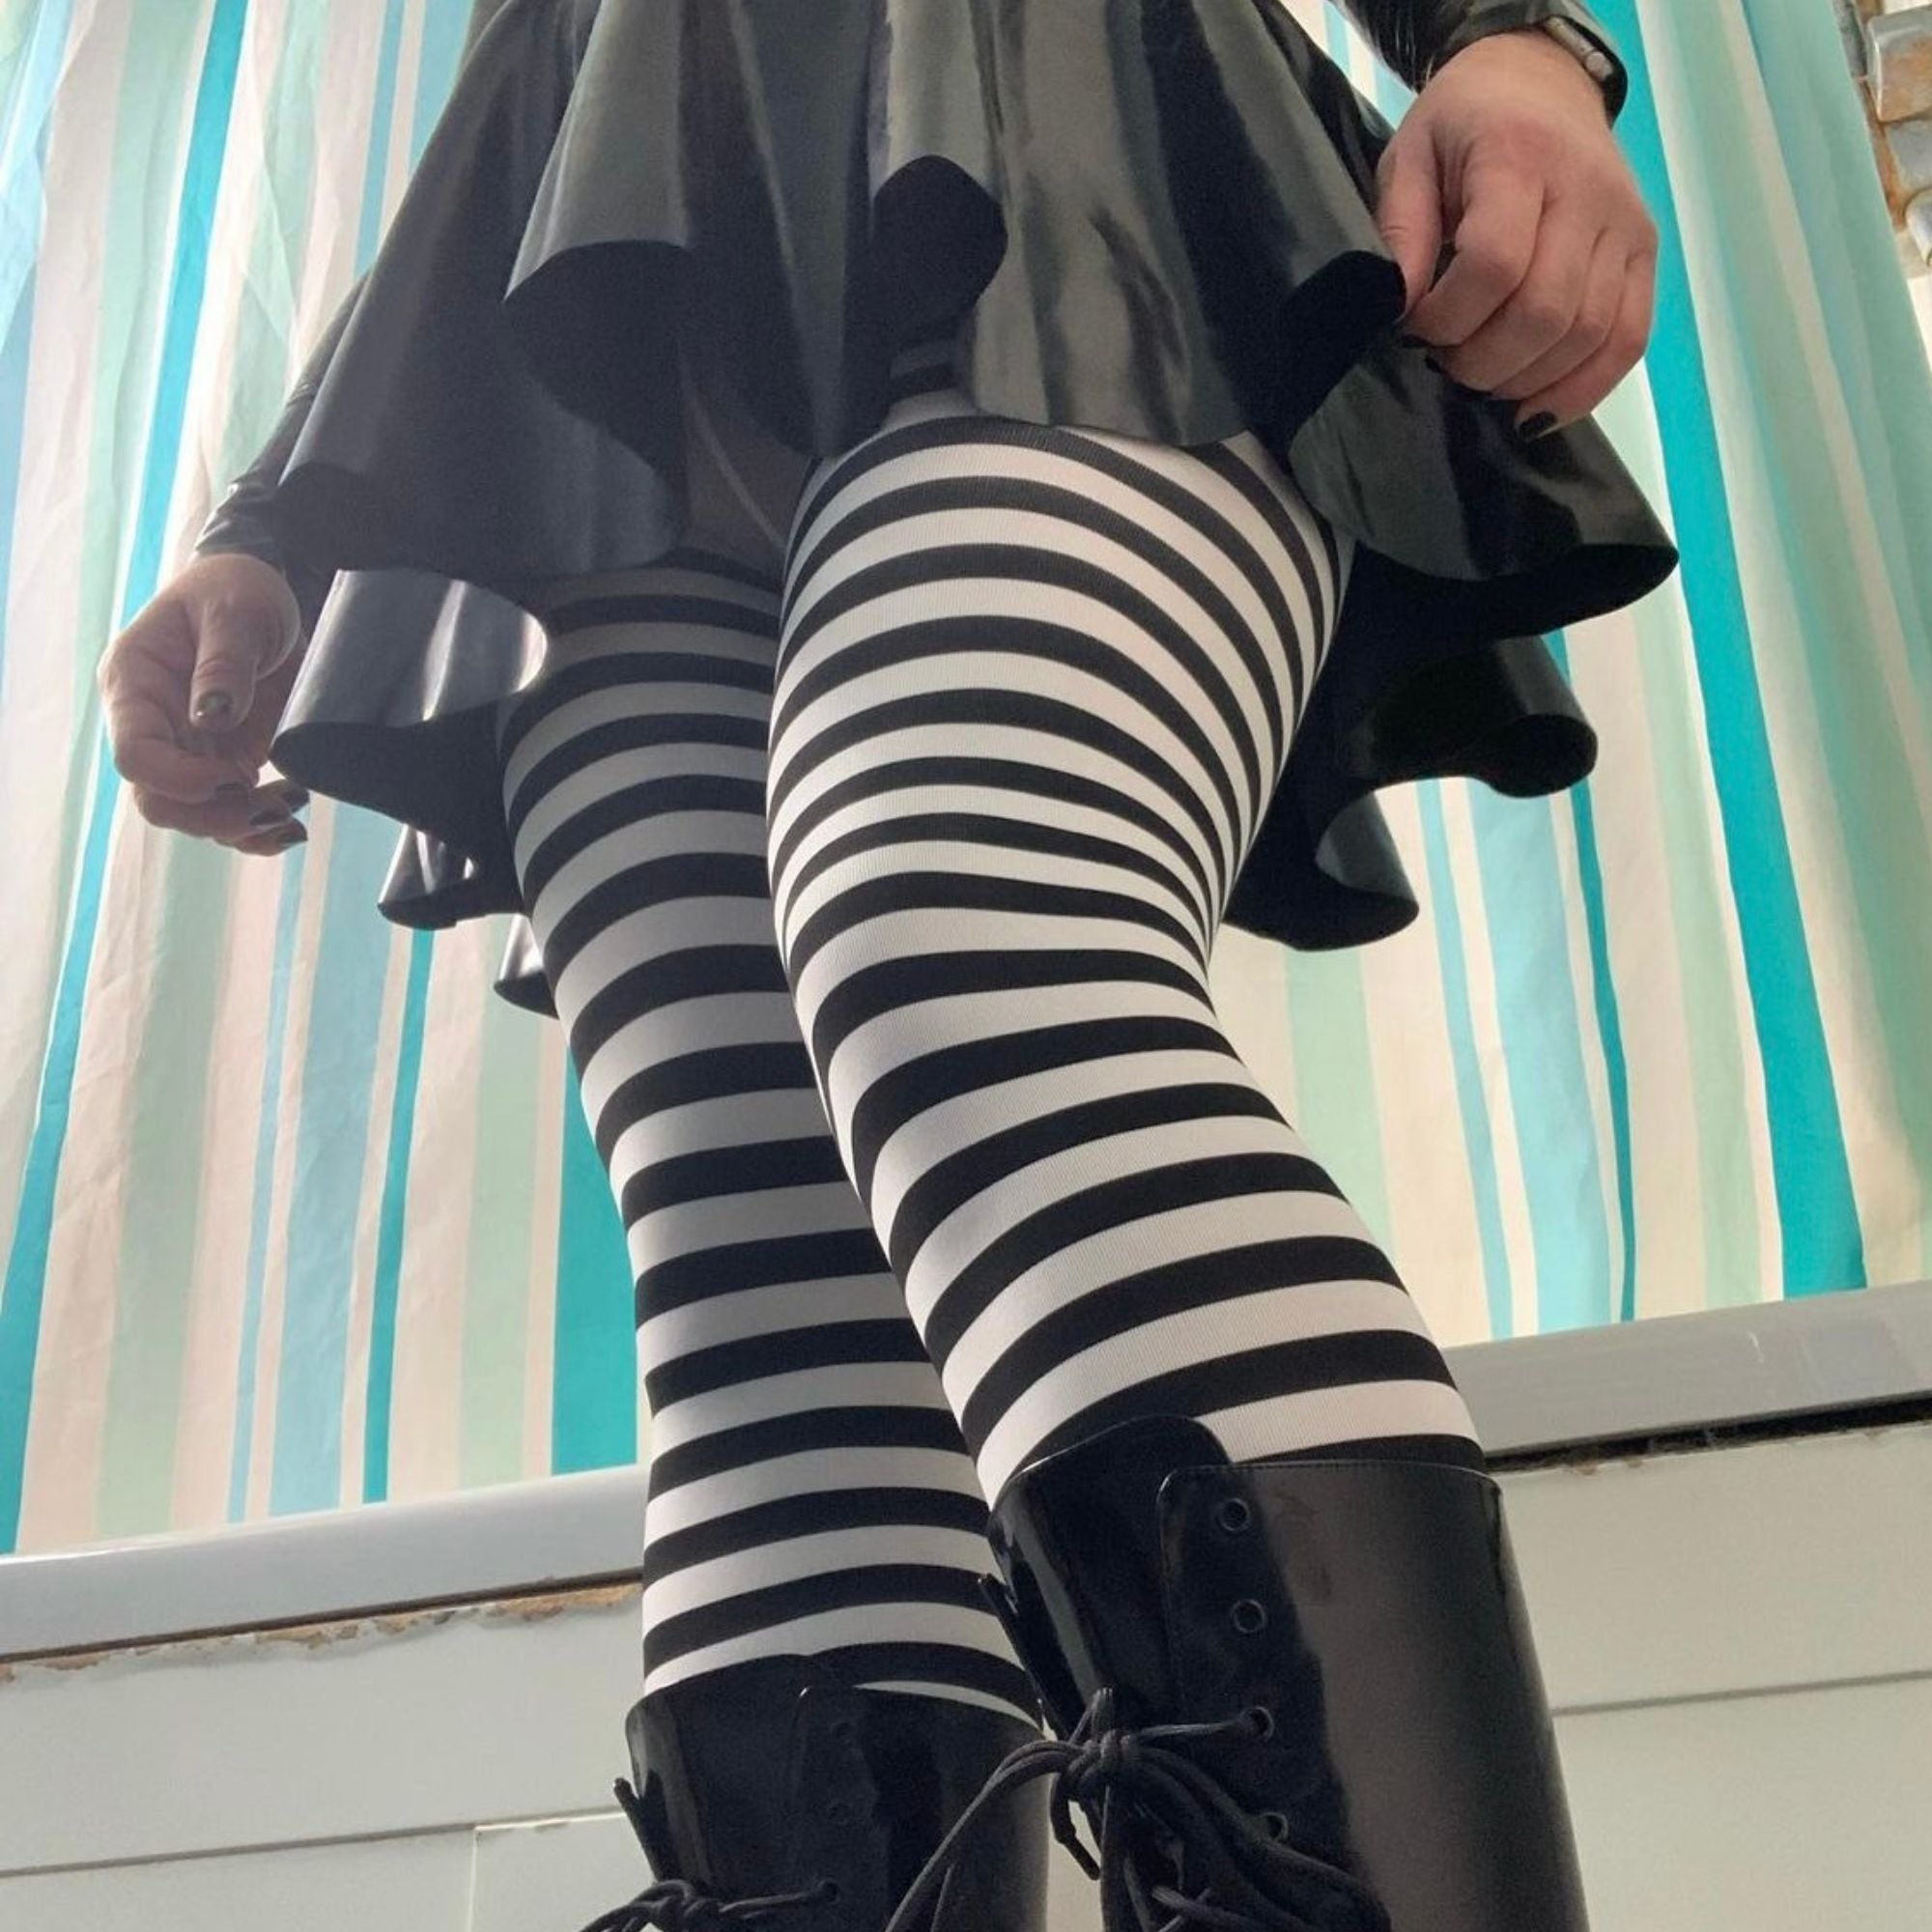 Witch Black and White Striped Stockings